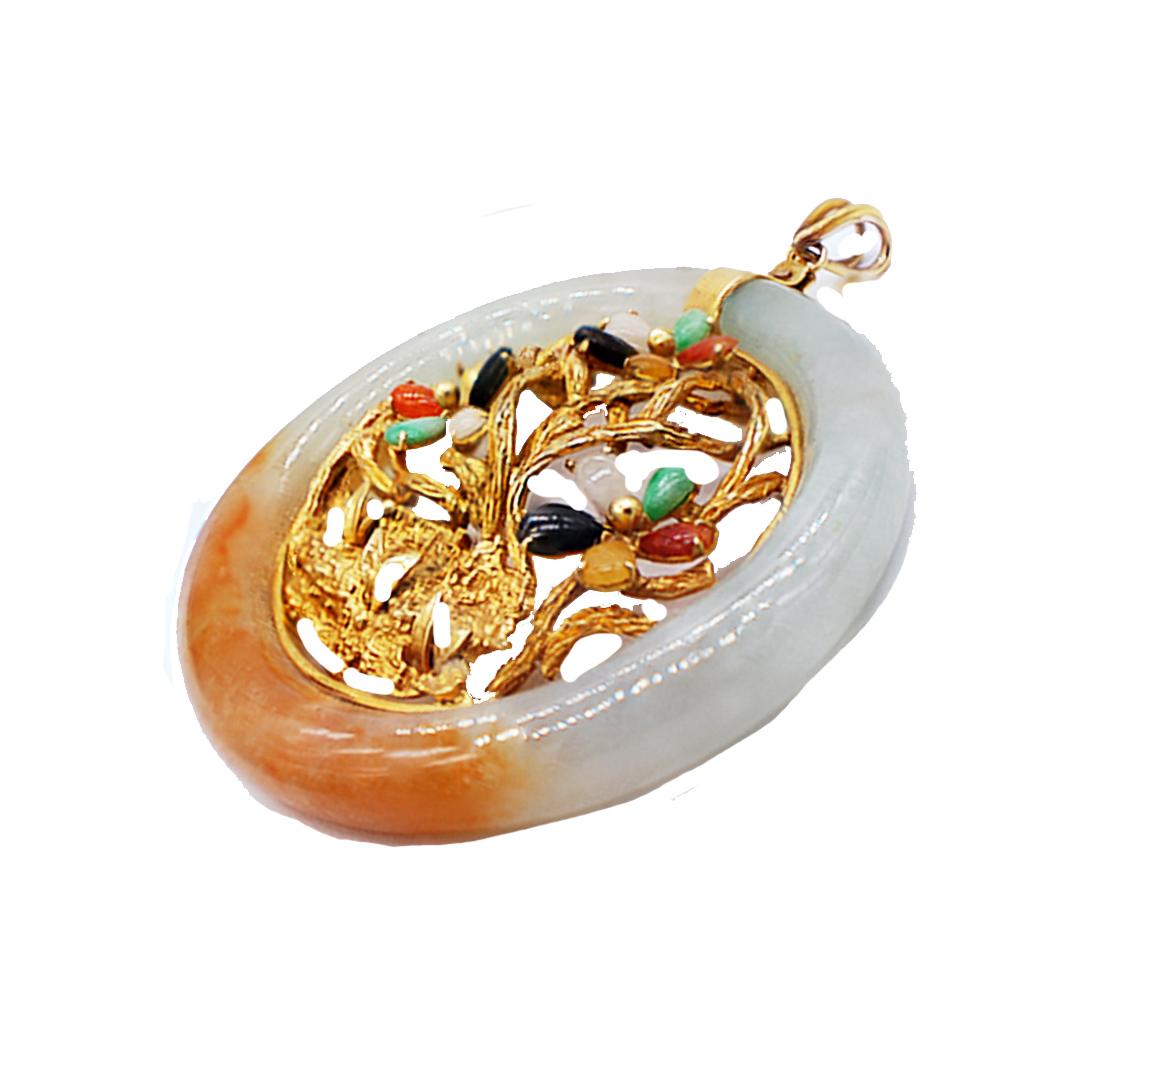 Jade Pendant Tree of Life with Gold branches and live-type colored tree canopy

14 karat yellow gold encrusted tree symbol consists of jade colors of black, green, lavender orange and brown colors. The pendant measures 2 inches in diameter and had a